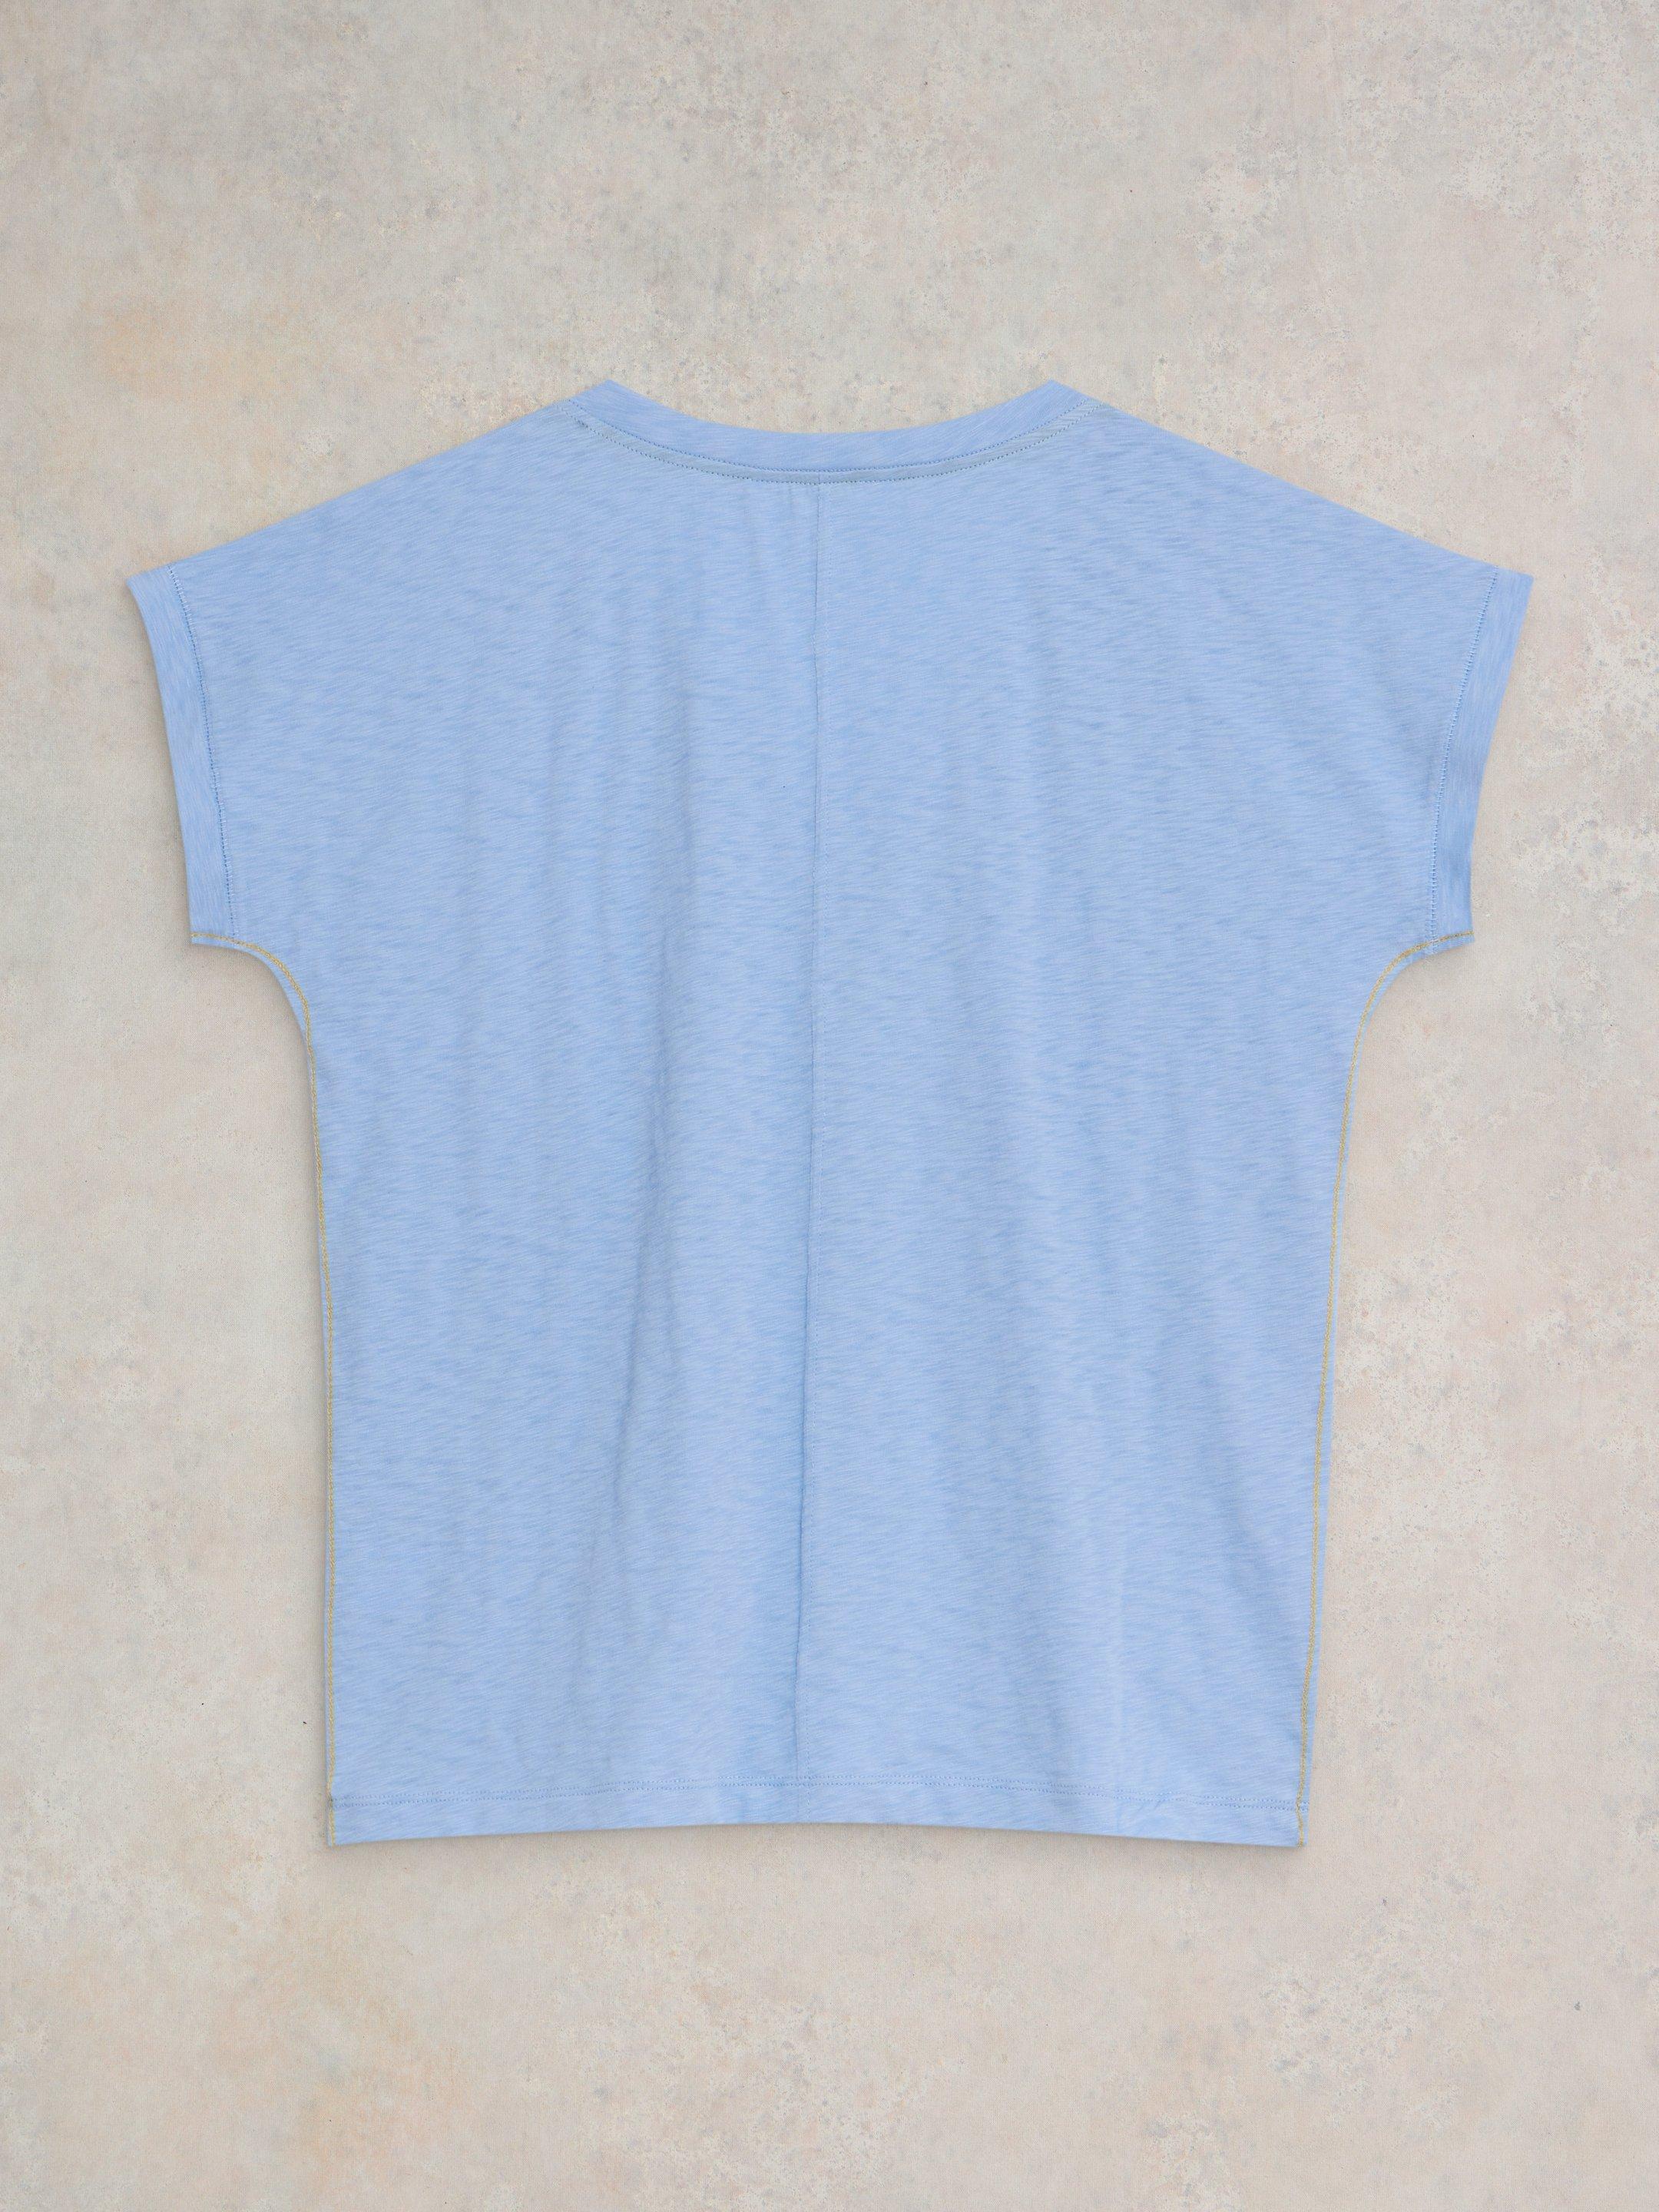 NELLY NOTCH NECK COTTON TEE in LGT BLUE - FLAT BACK